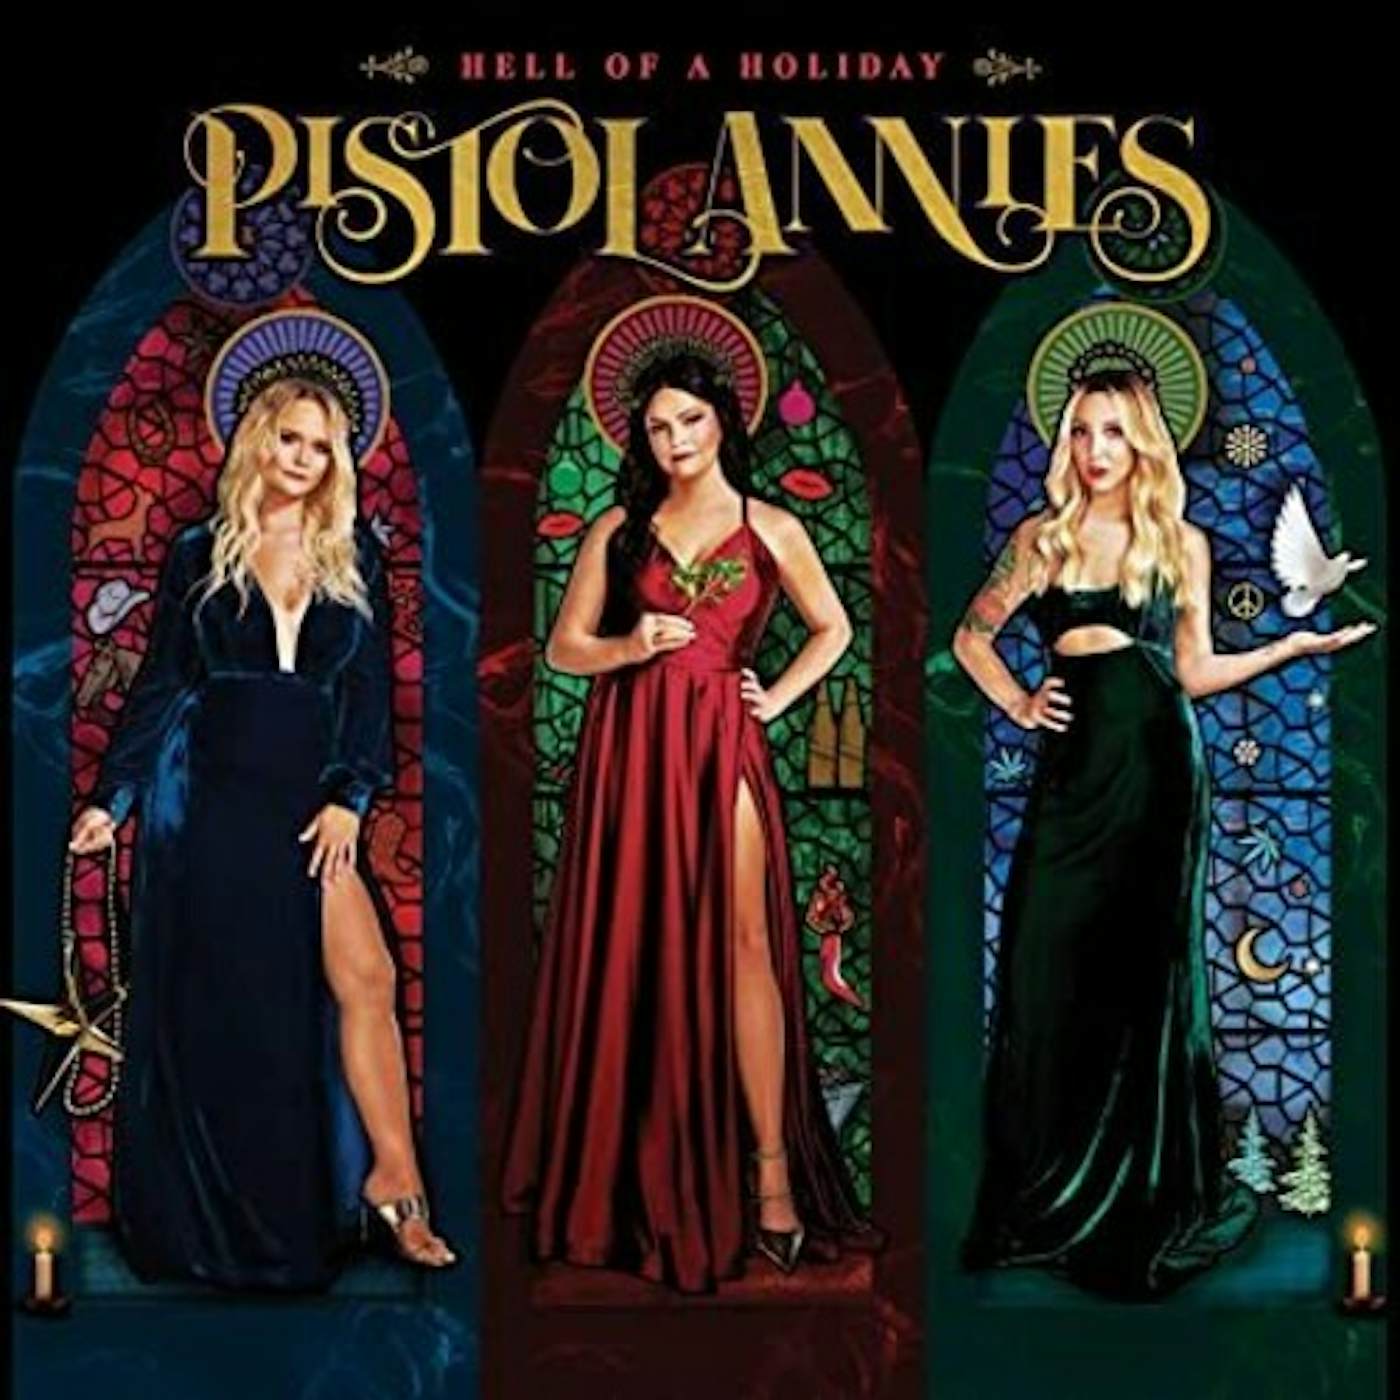 Pistol Annies Hell of a Holiday Vinyl Record